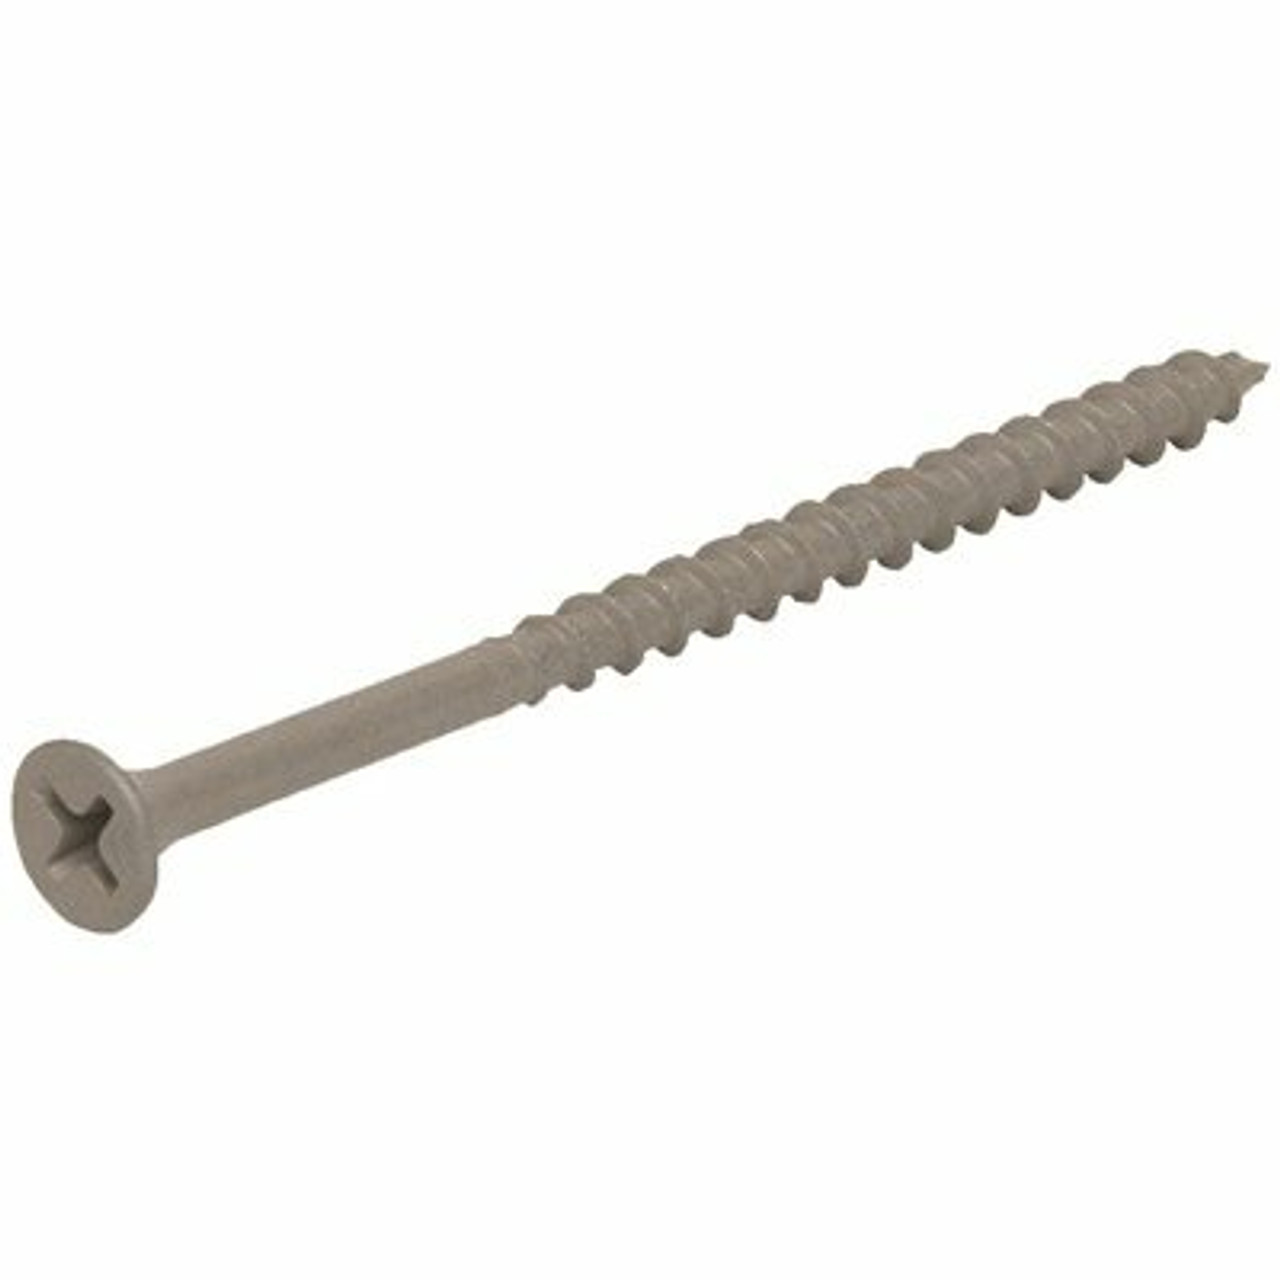 Grip-Rite #8 X 1-1/4 In. Philips Bugle-Head Coarse Thread Sharp Point Polymer Coated Exterior Screw (1 Lb./Pack)